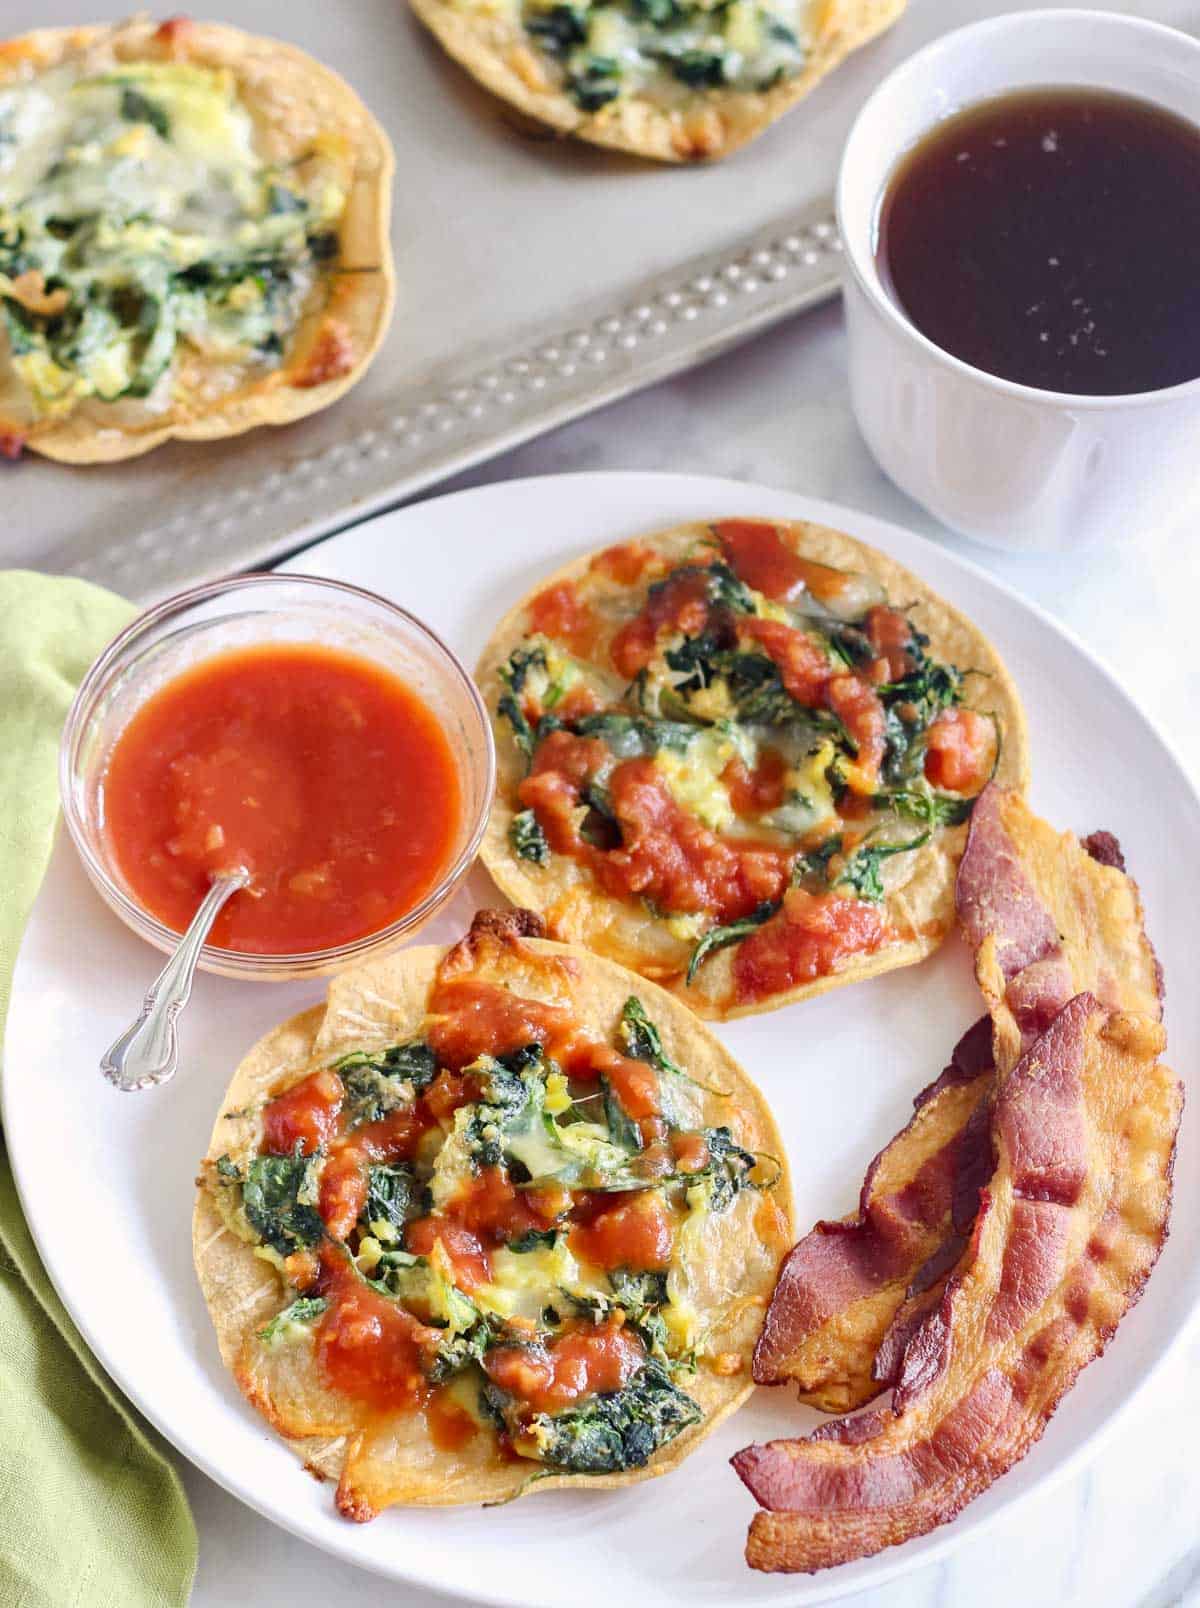 white plate with two breakfast tostadas, slice of bacon, bowl of salsa next to a cup of tea, green napkin, and baking sheet with extra tostadas.